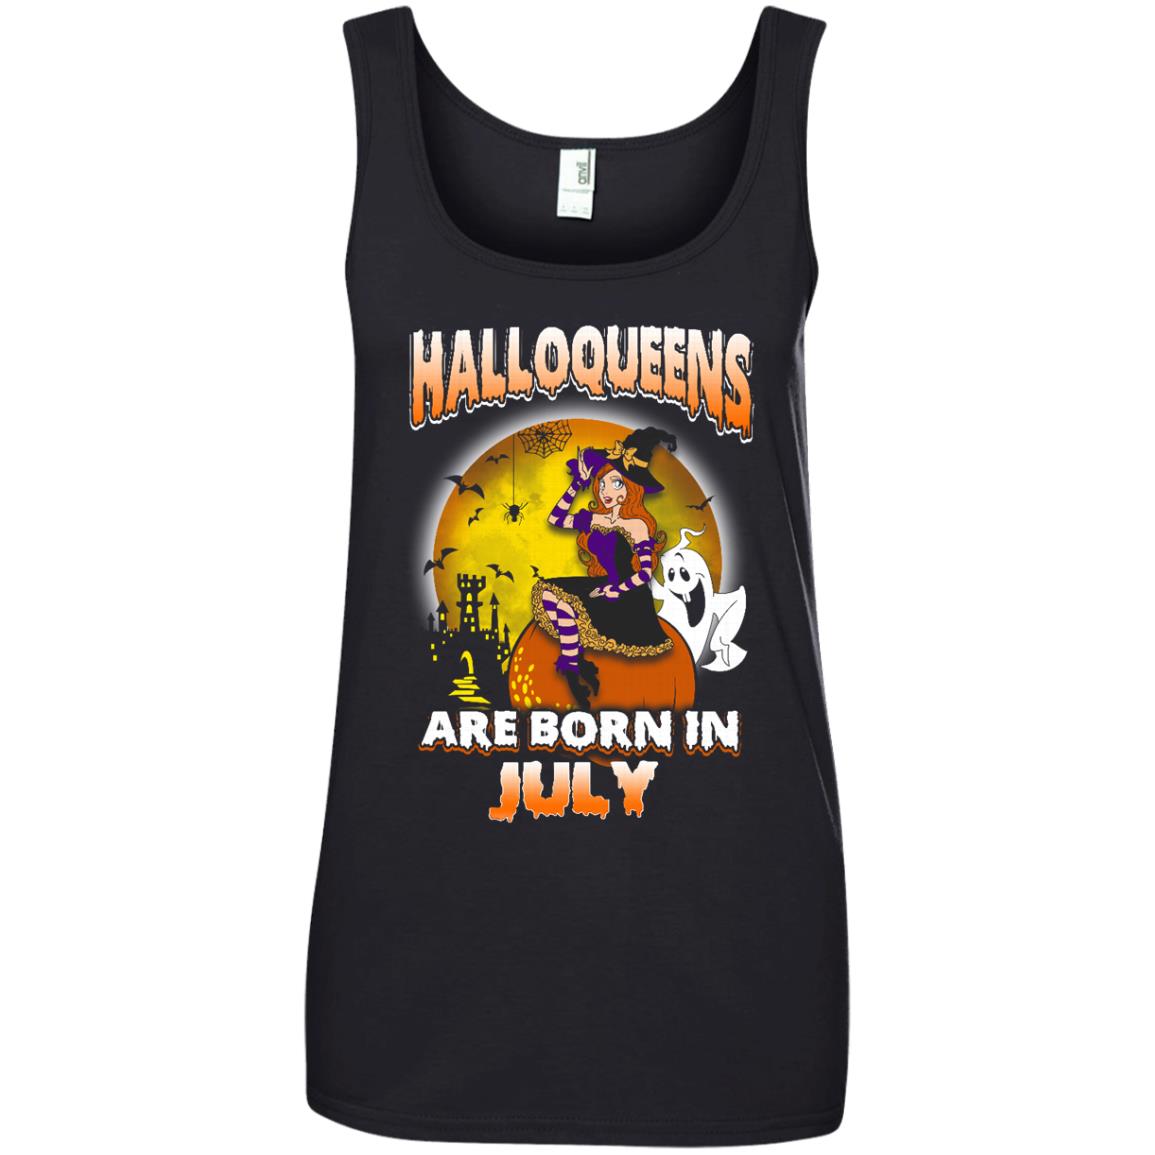 Halloqueens are born in July shirt, hoodie, tank